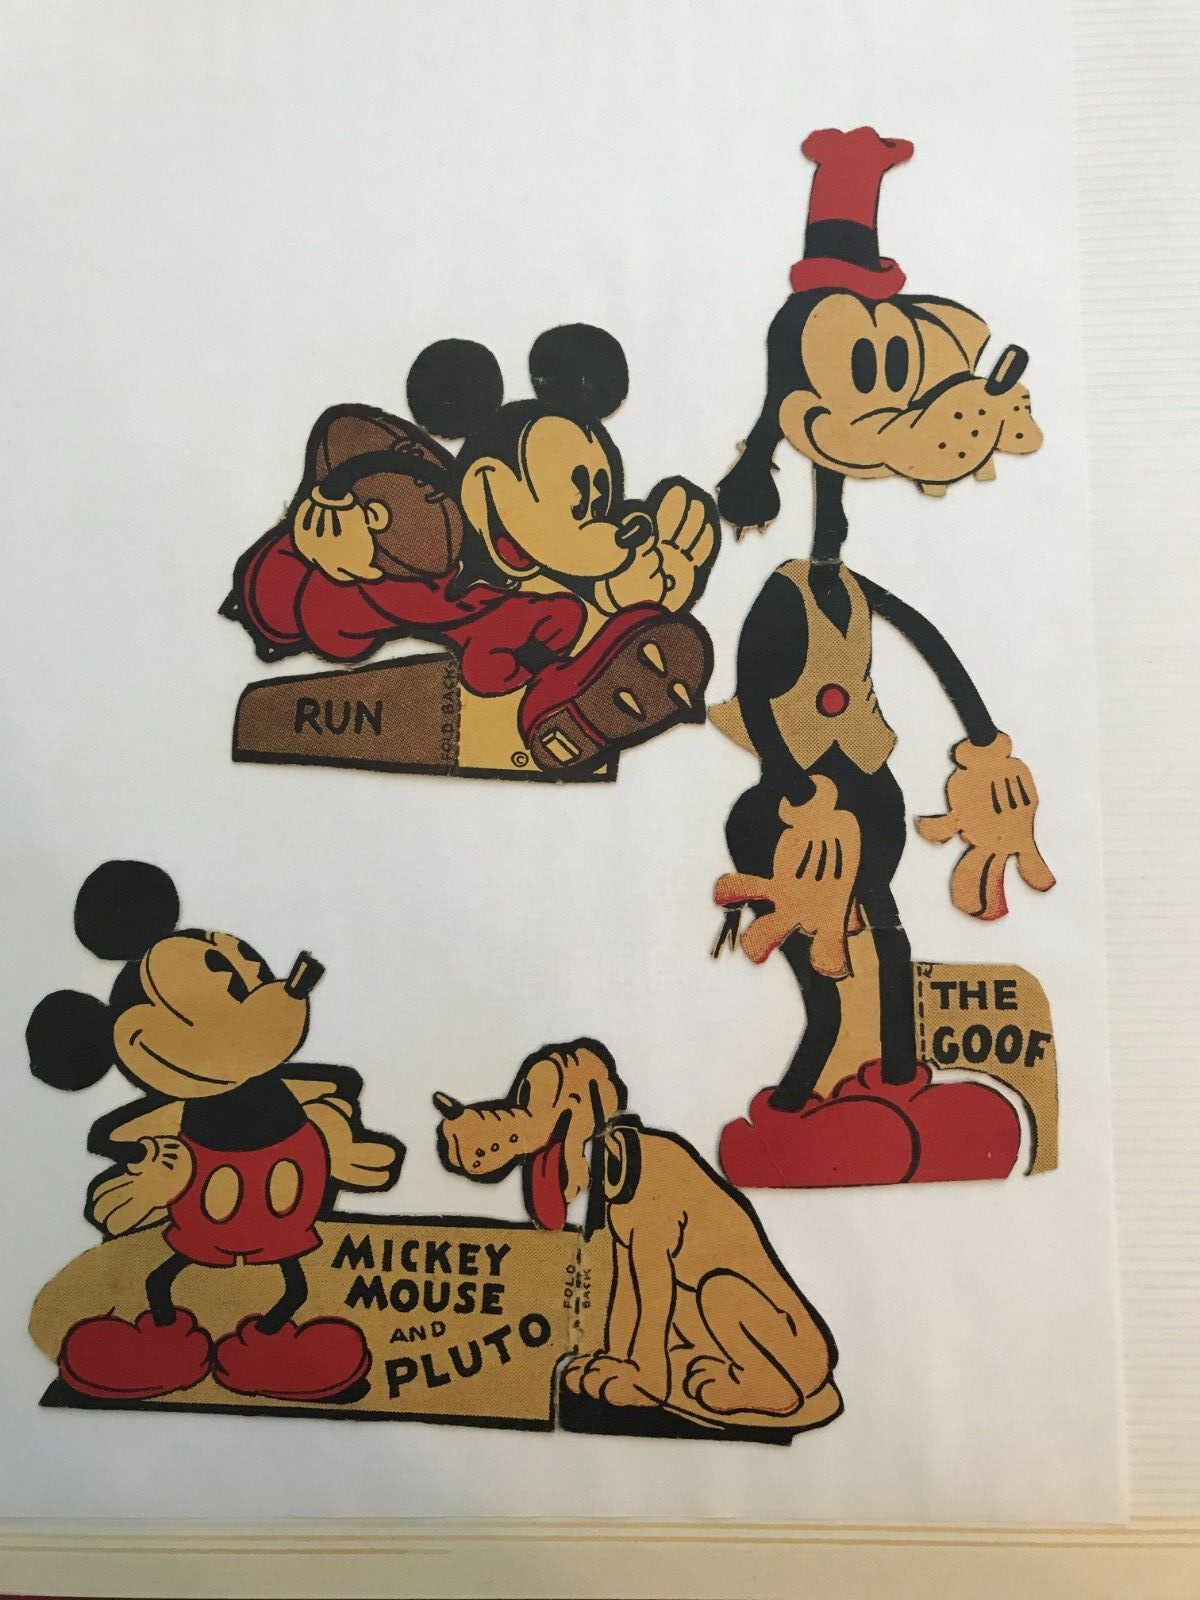 Disney vintage advertisement - Post Toasties and Cut-outs